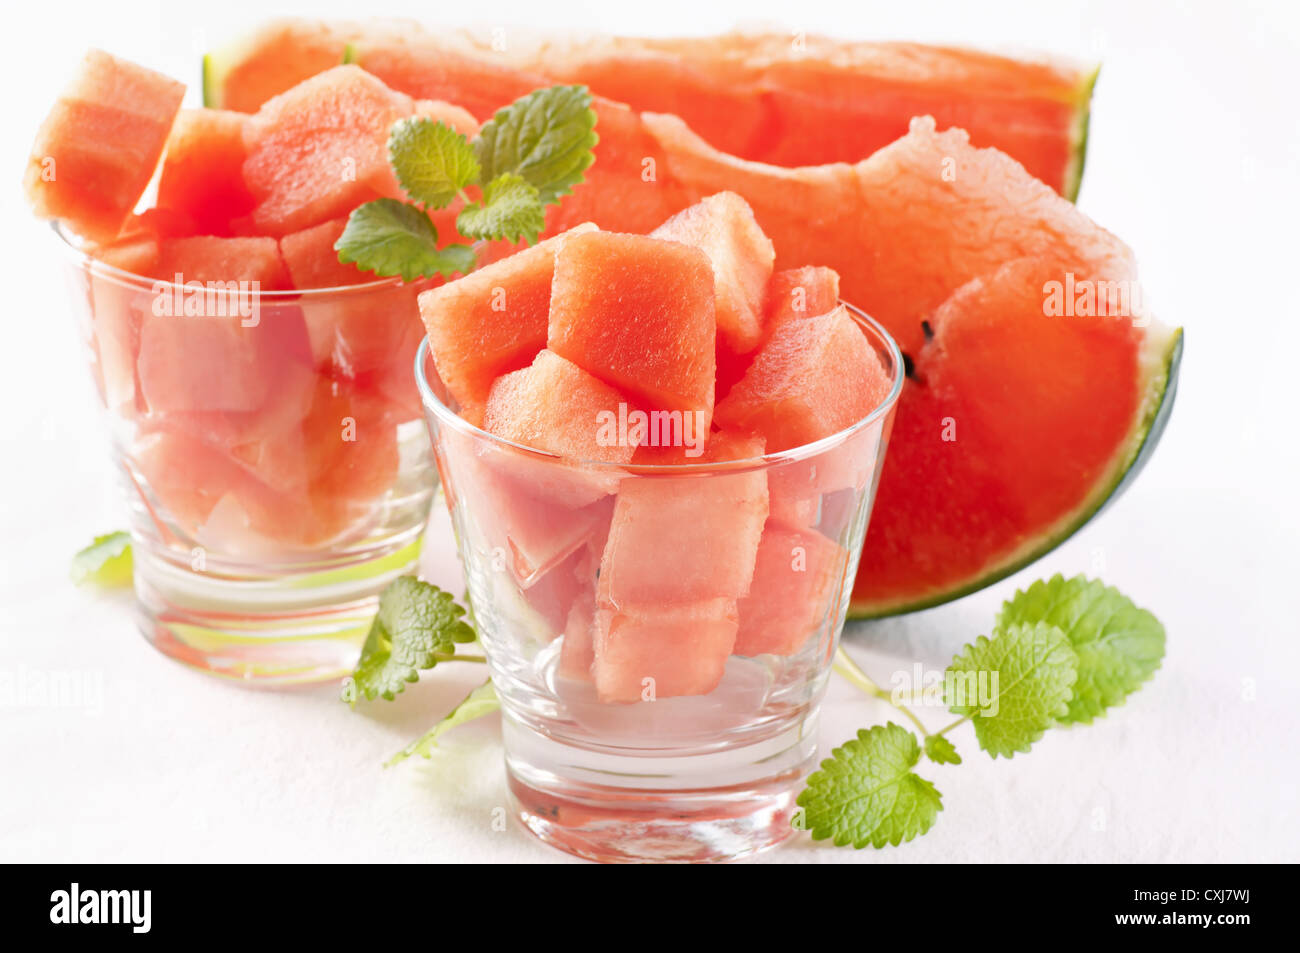 Watermelon isolated Banque D'Images